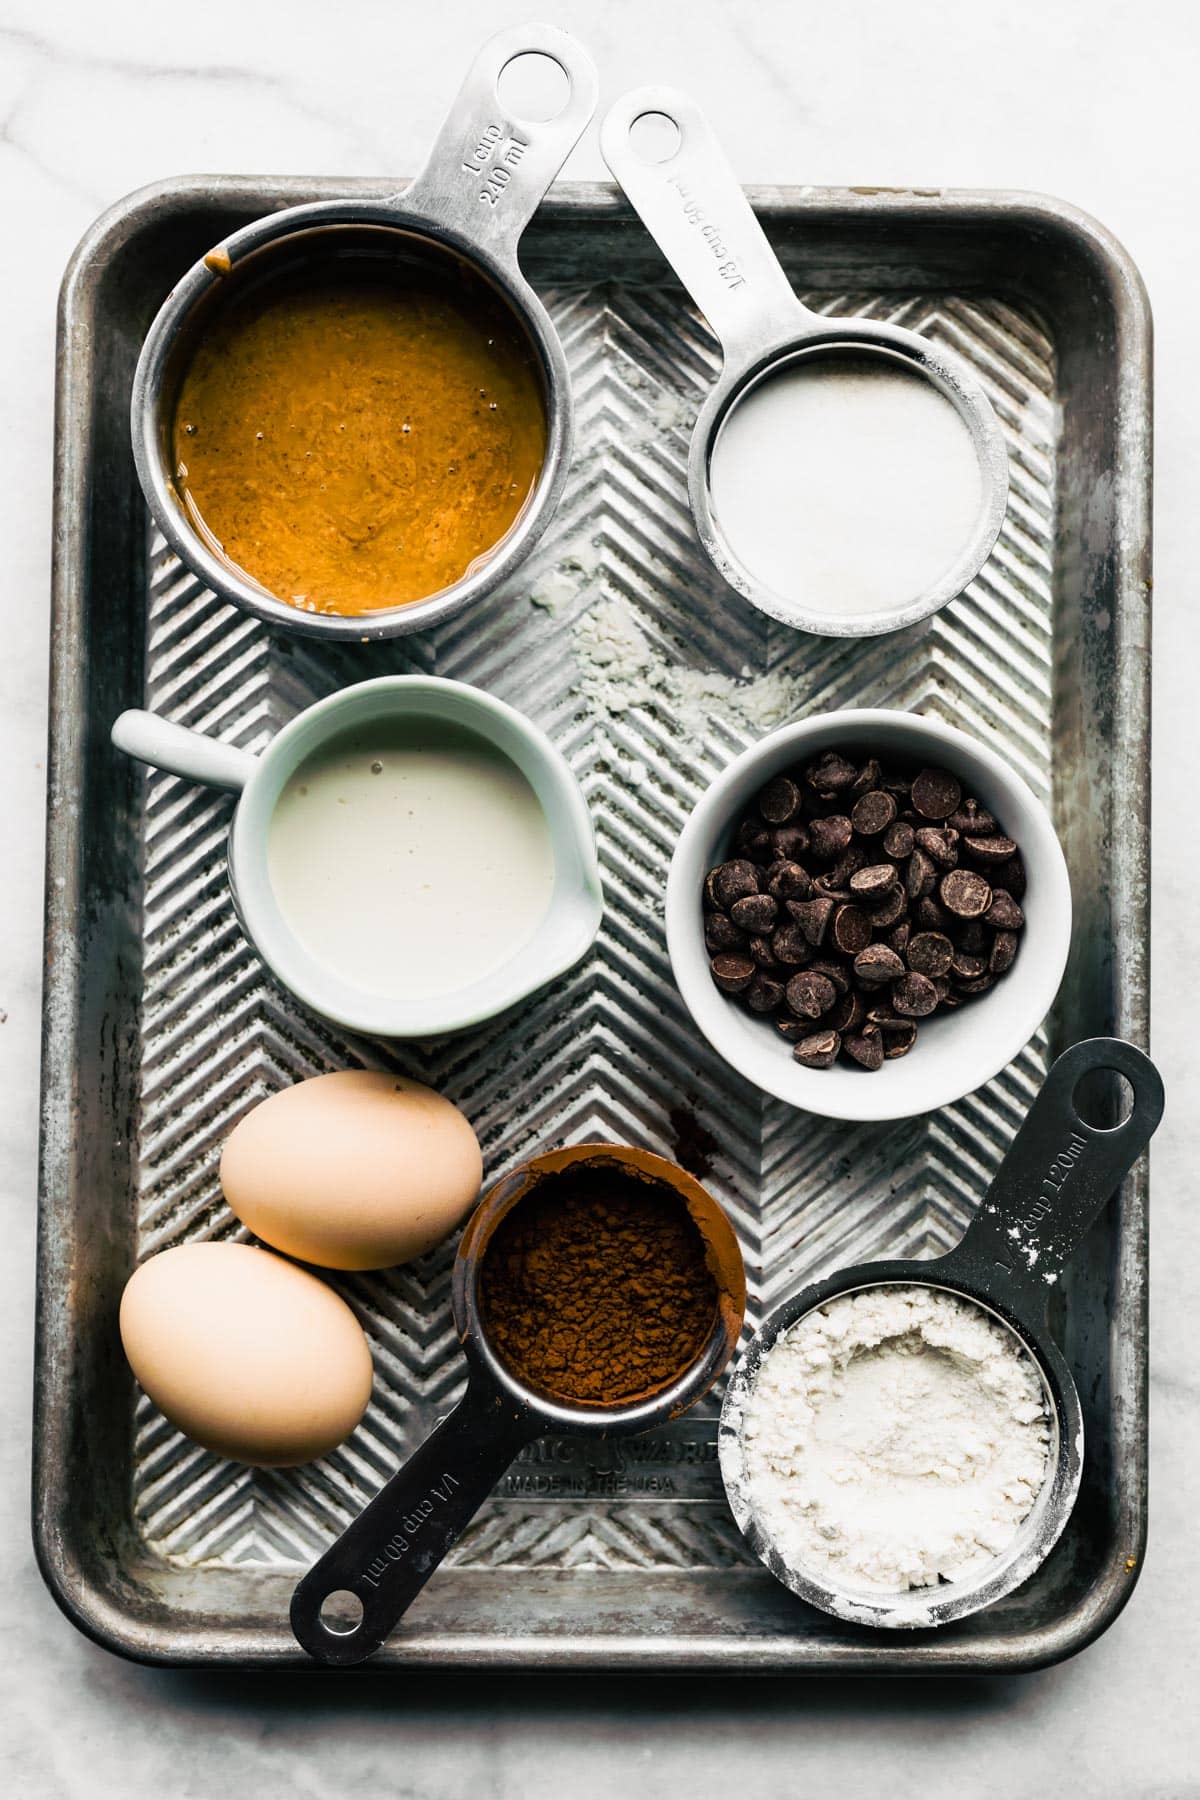 Overhead image of ingredients for gluten free brownies including nut butter, non-dairy milk, two eggs, cocoa powder, gluten-free flour, and chocolate chips.